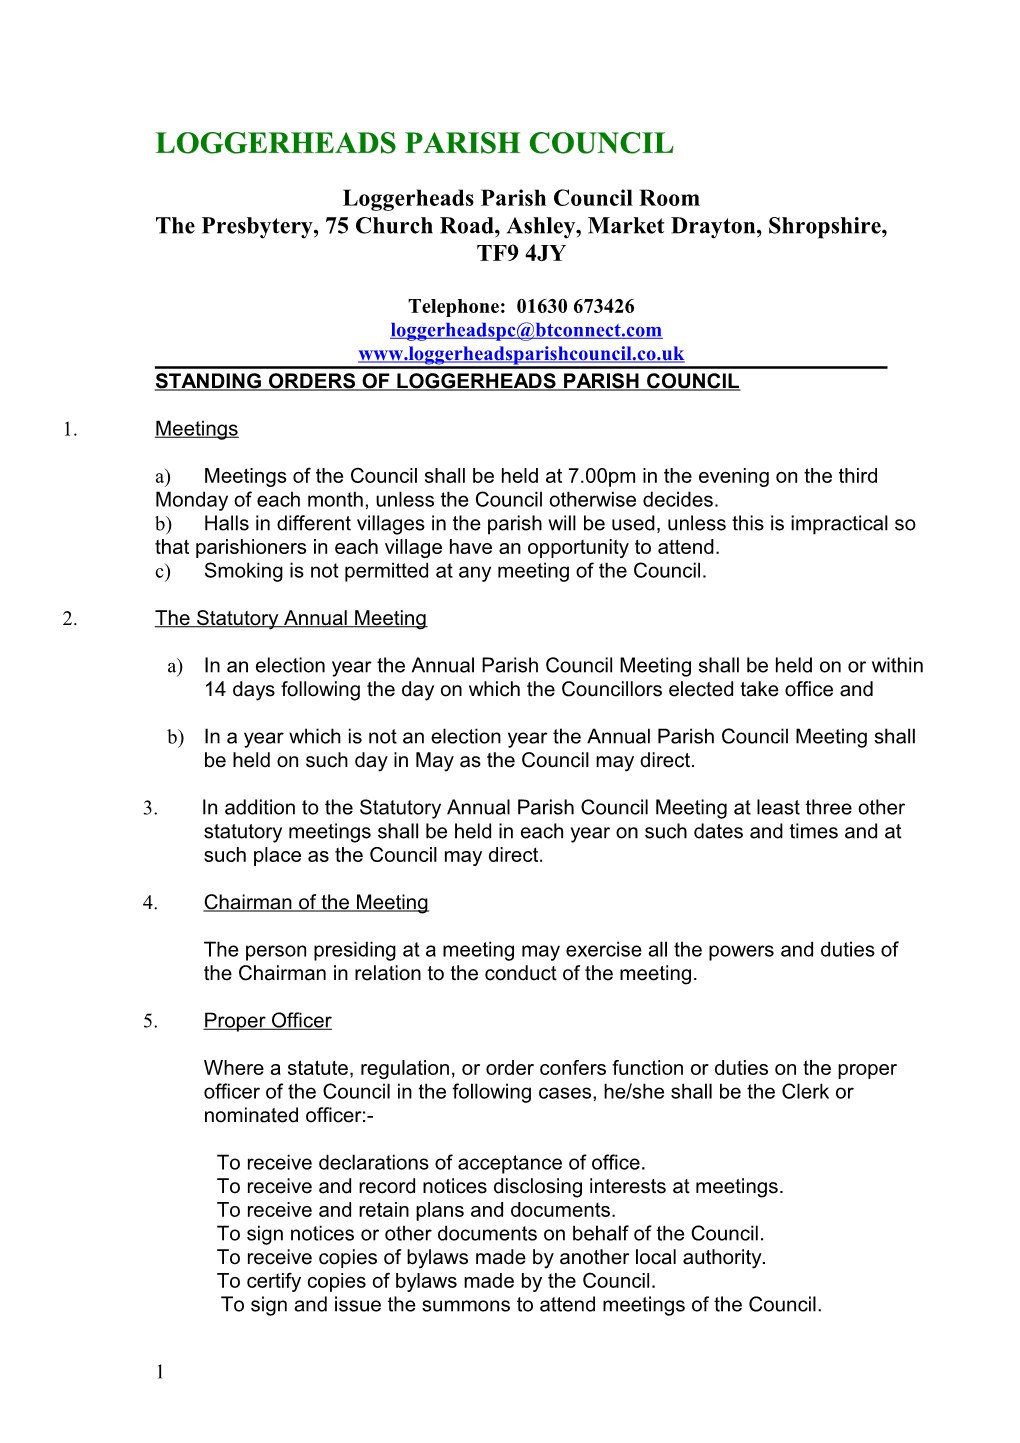 Standing Orders of Maer and Aston Parish Council